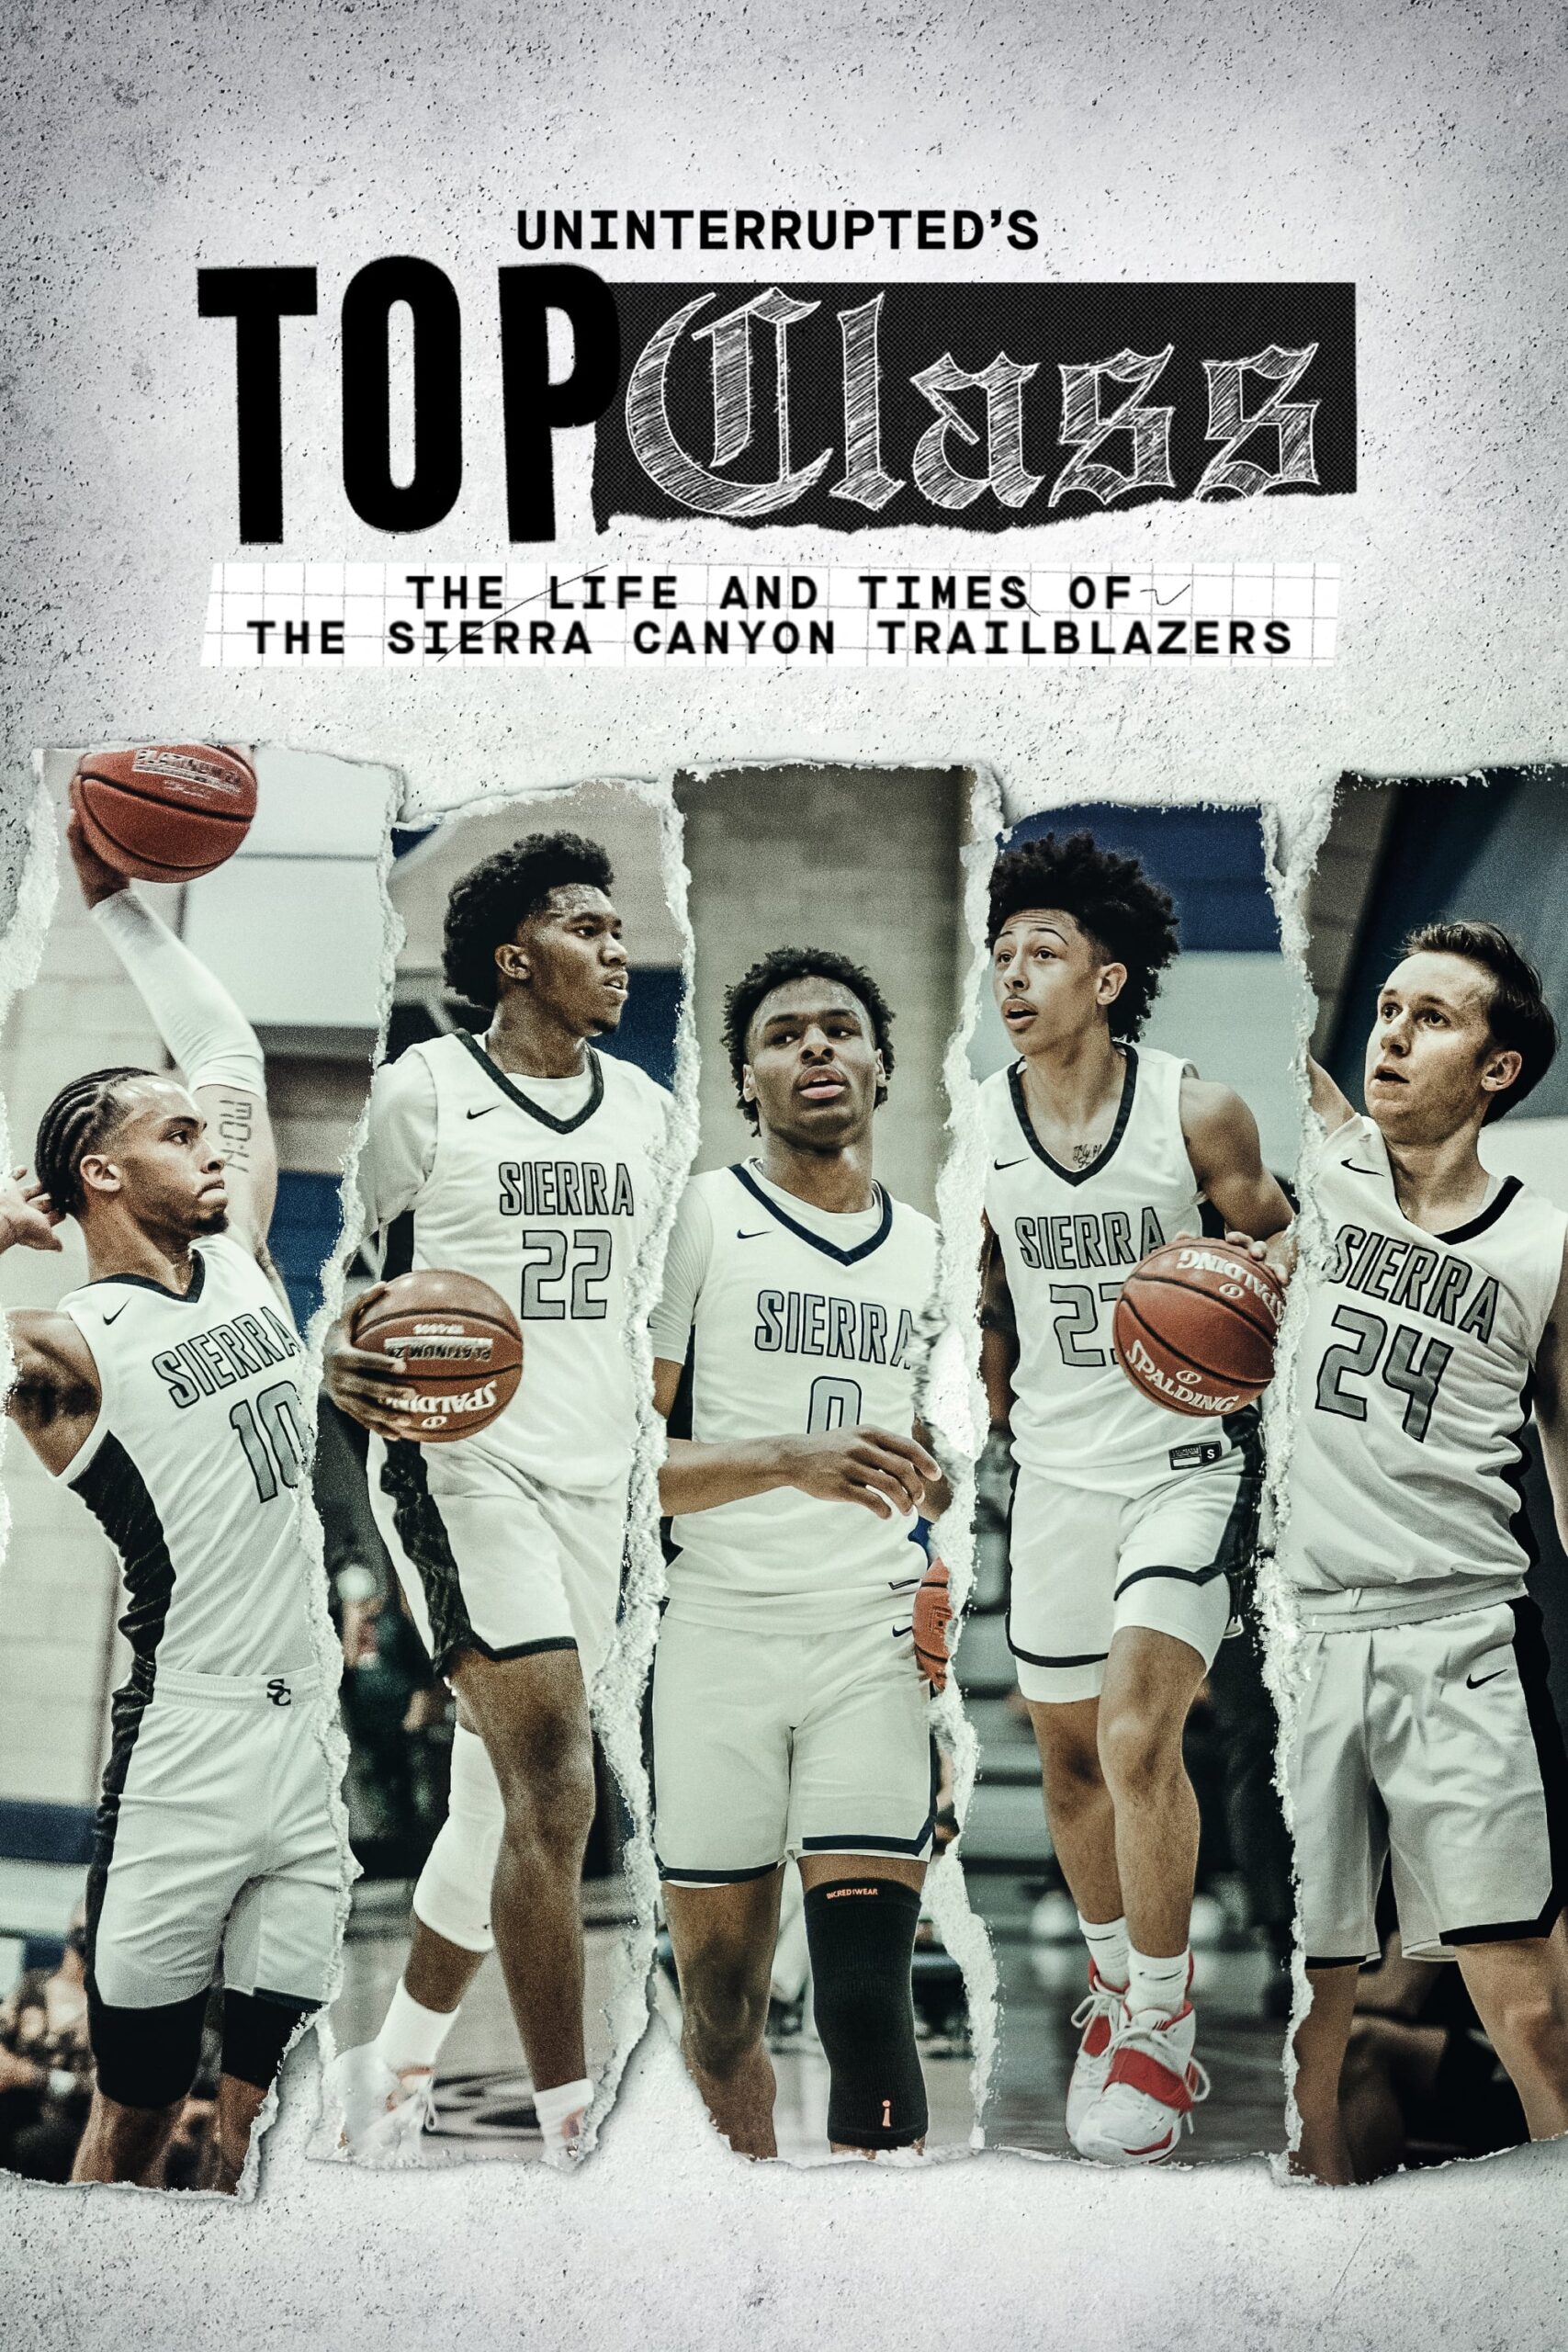 Uninterrupted's Top Class: The Life and Times of the Sierra Canyon Trailblazers poster